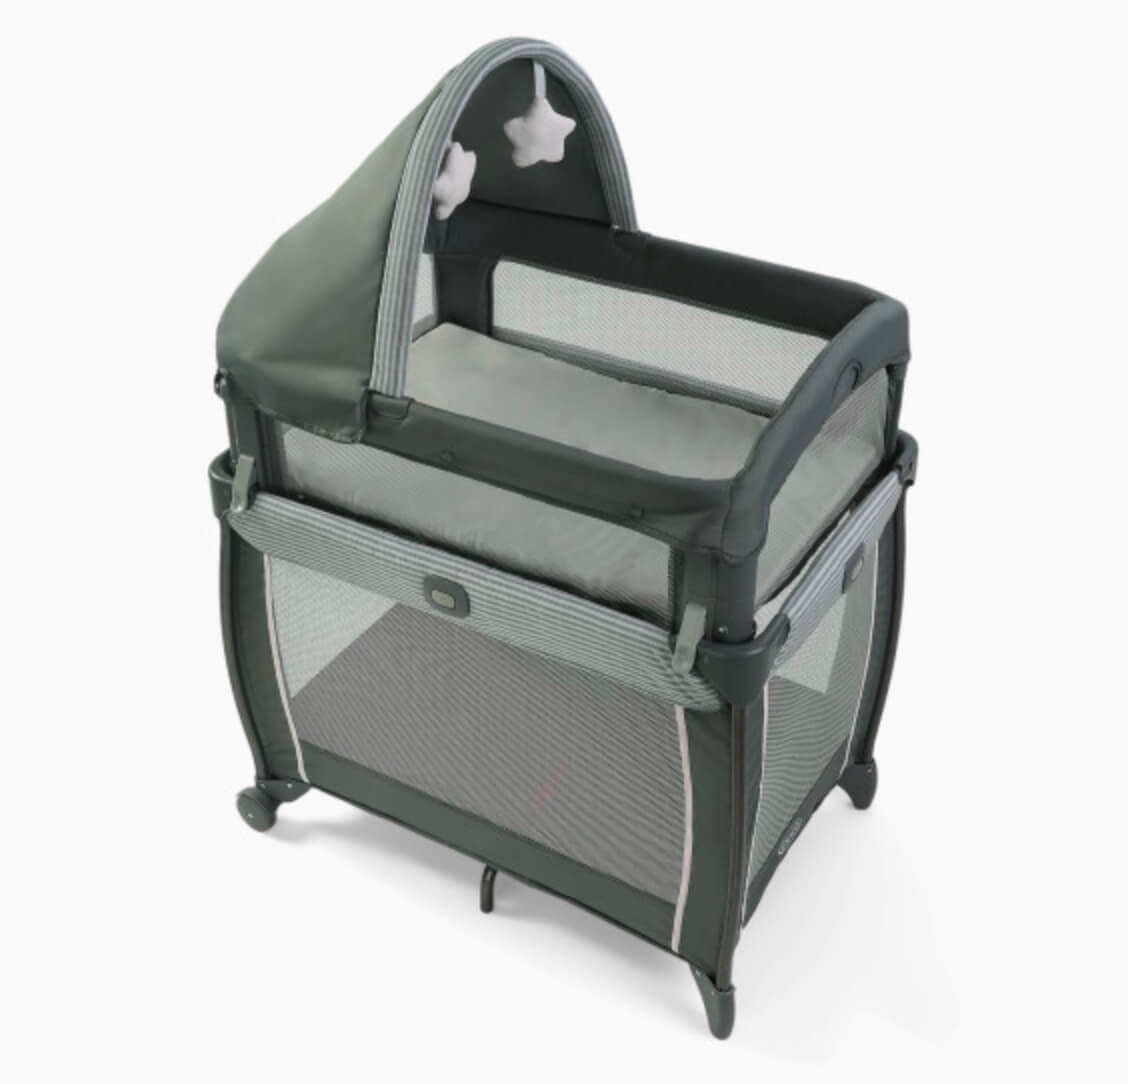 Graco My View 4-in-1 Bassinet, Montana